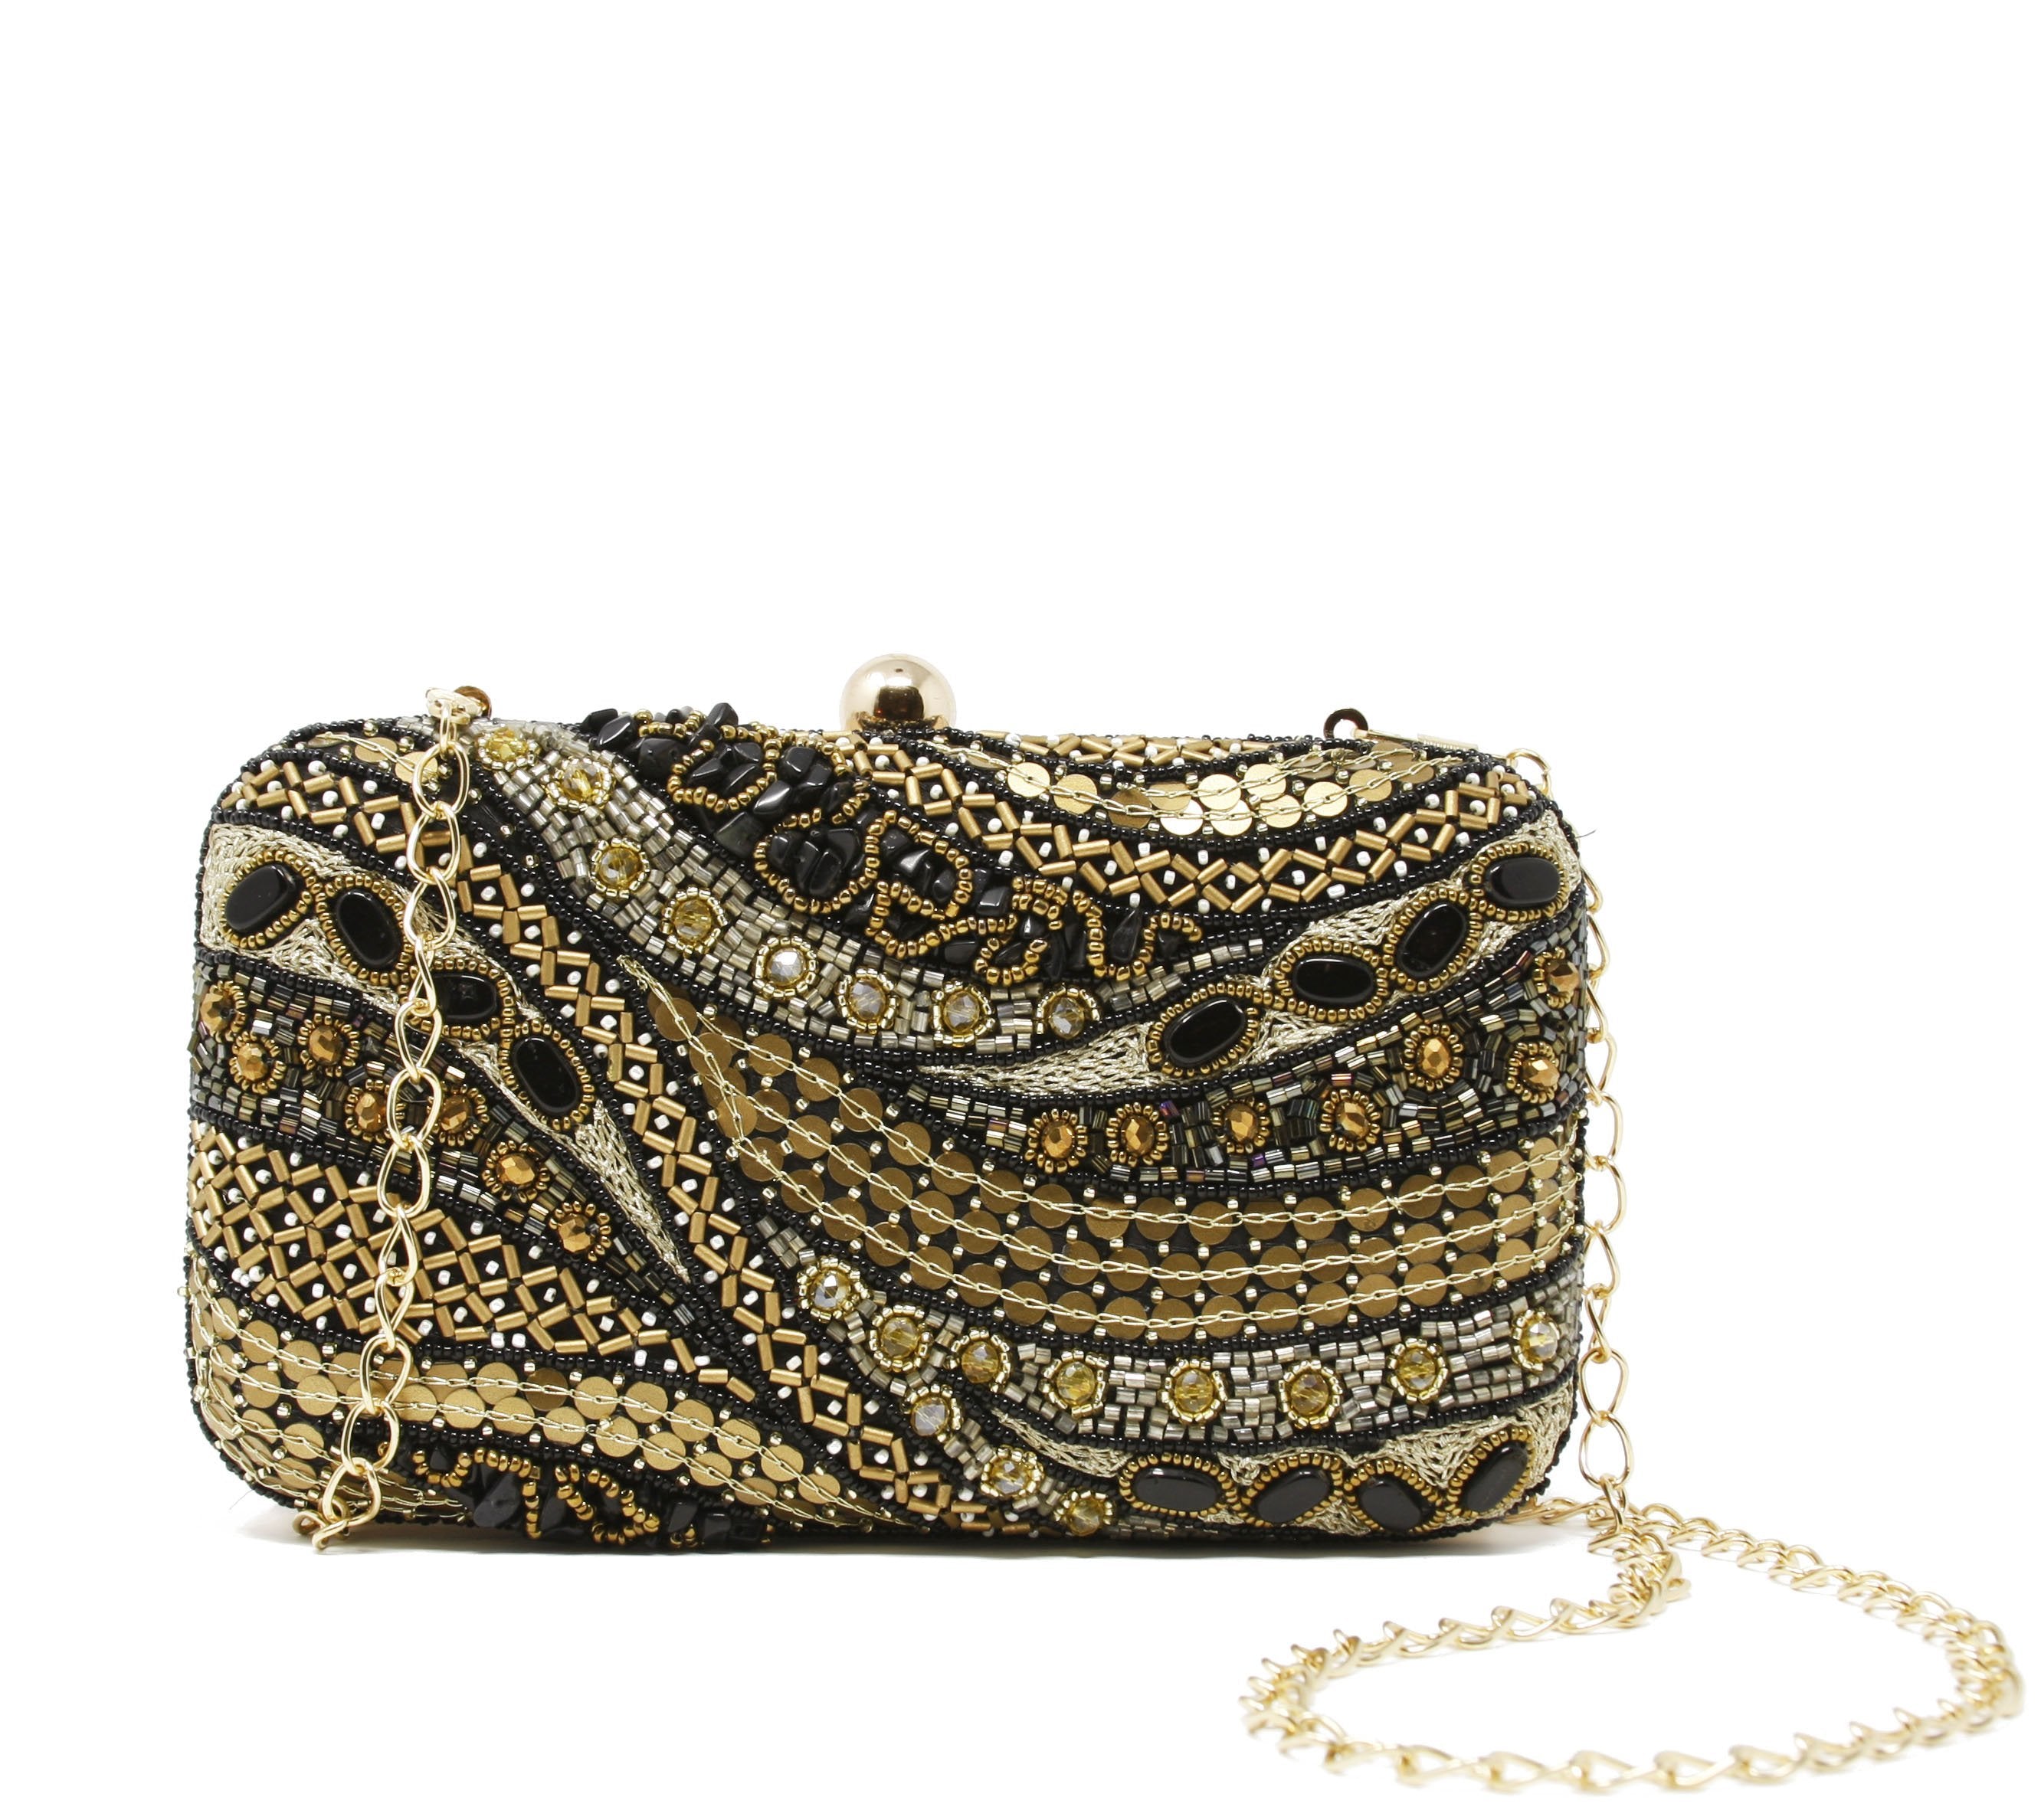 Beaded Embellished Black and Gold Box Clutch 4 Days